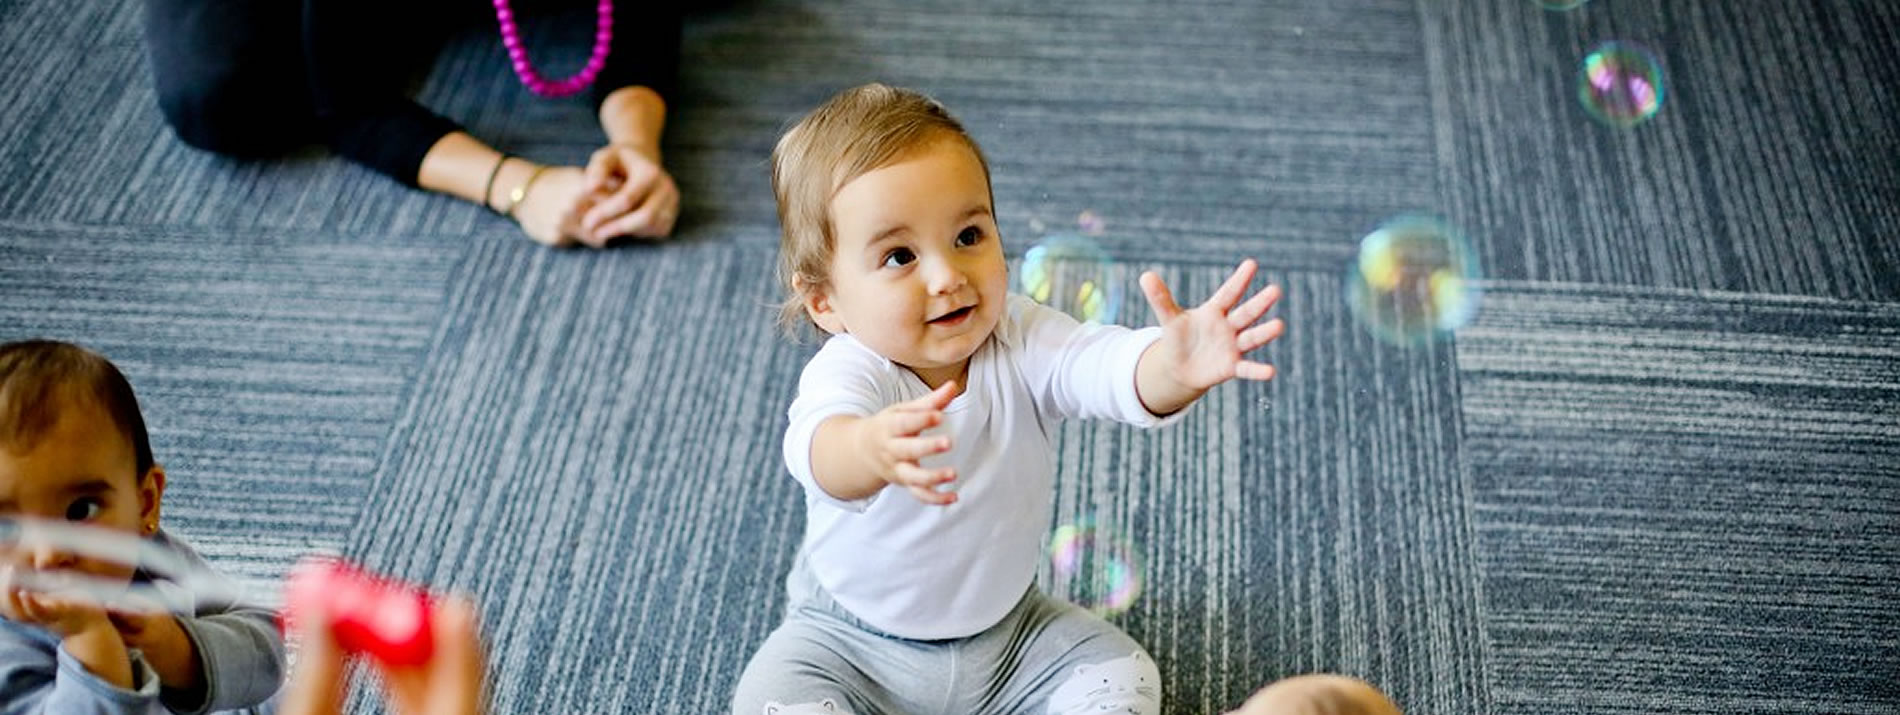 two babies playing with bubbles